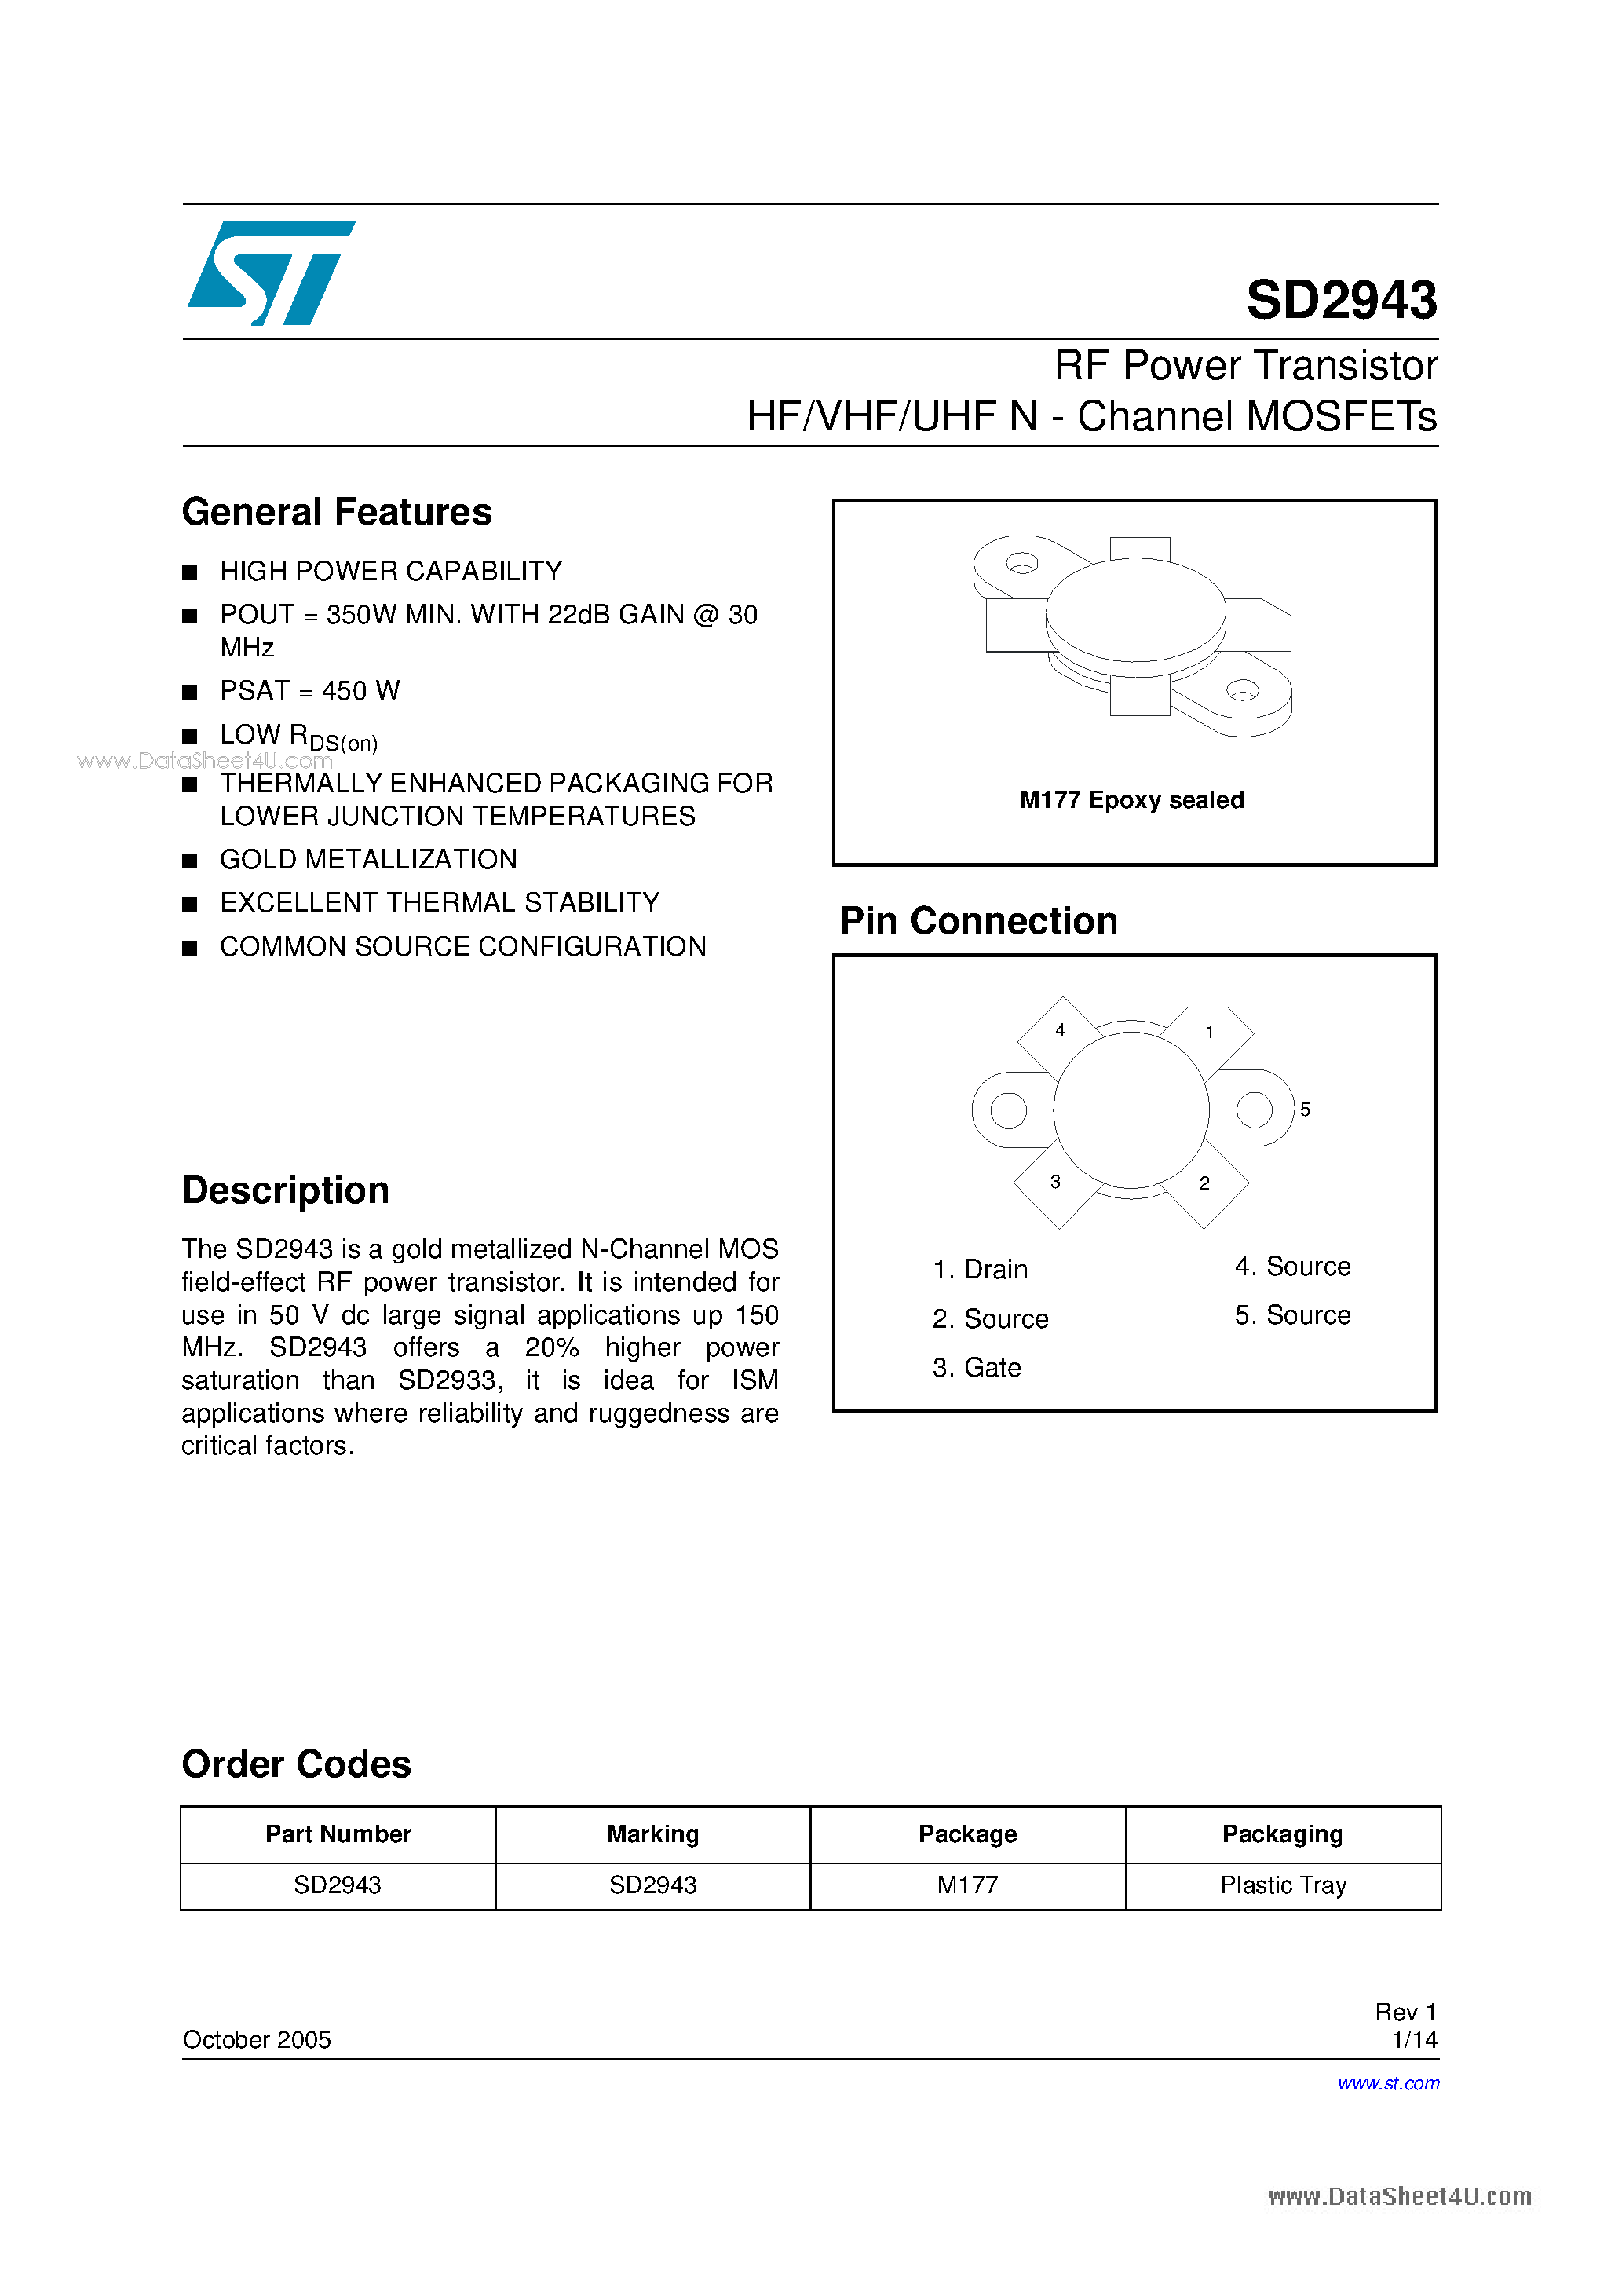 Datasheet SD2943 - RF Power Transistor HF/VHF/UHF N - Channel MOSFETs page 1